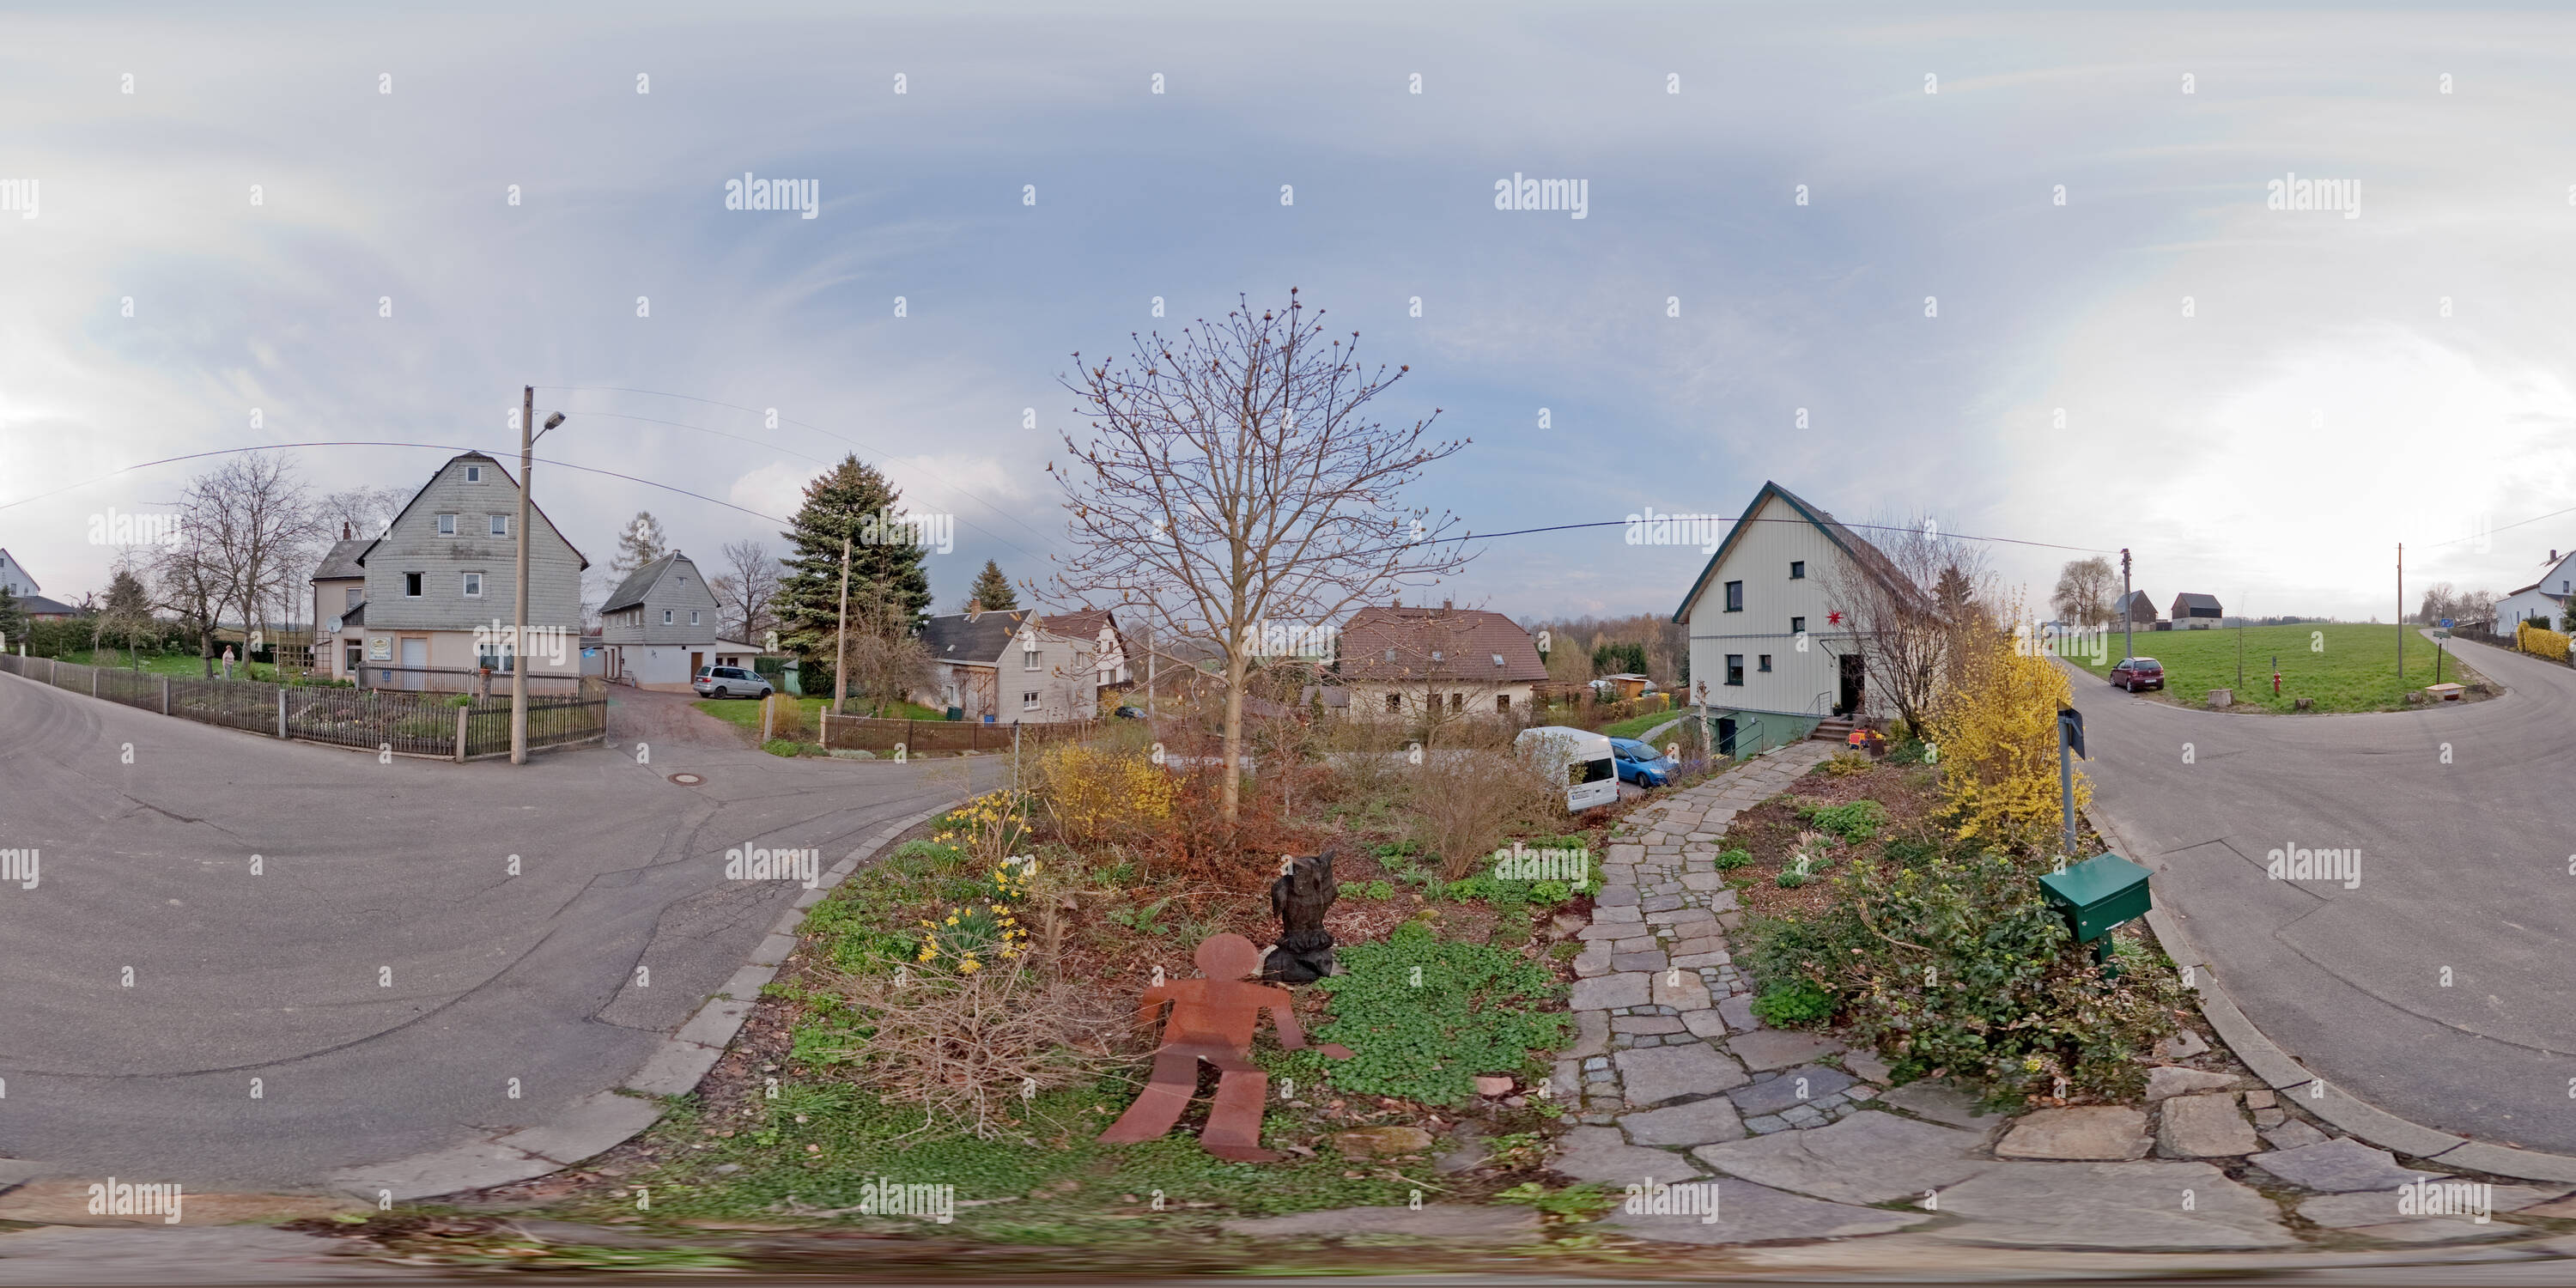 360 degree panoramic view of Streetview of Holzhaeuserstrasse, Callenberg in early spring